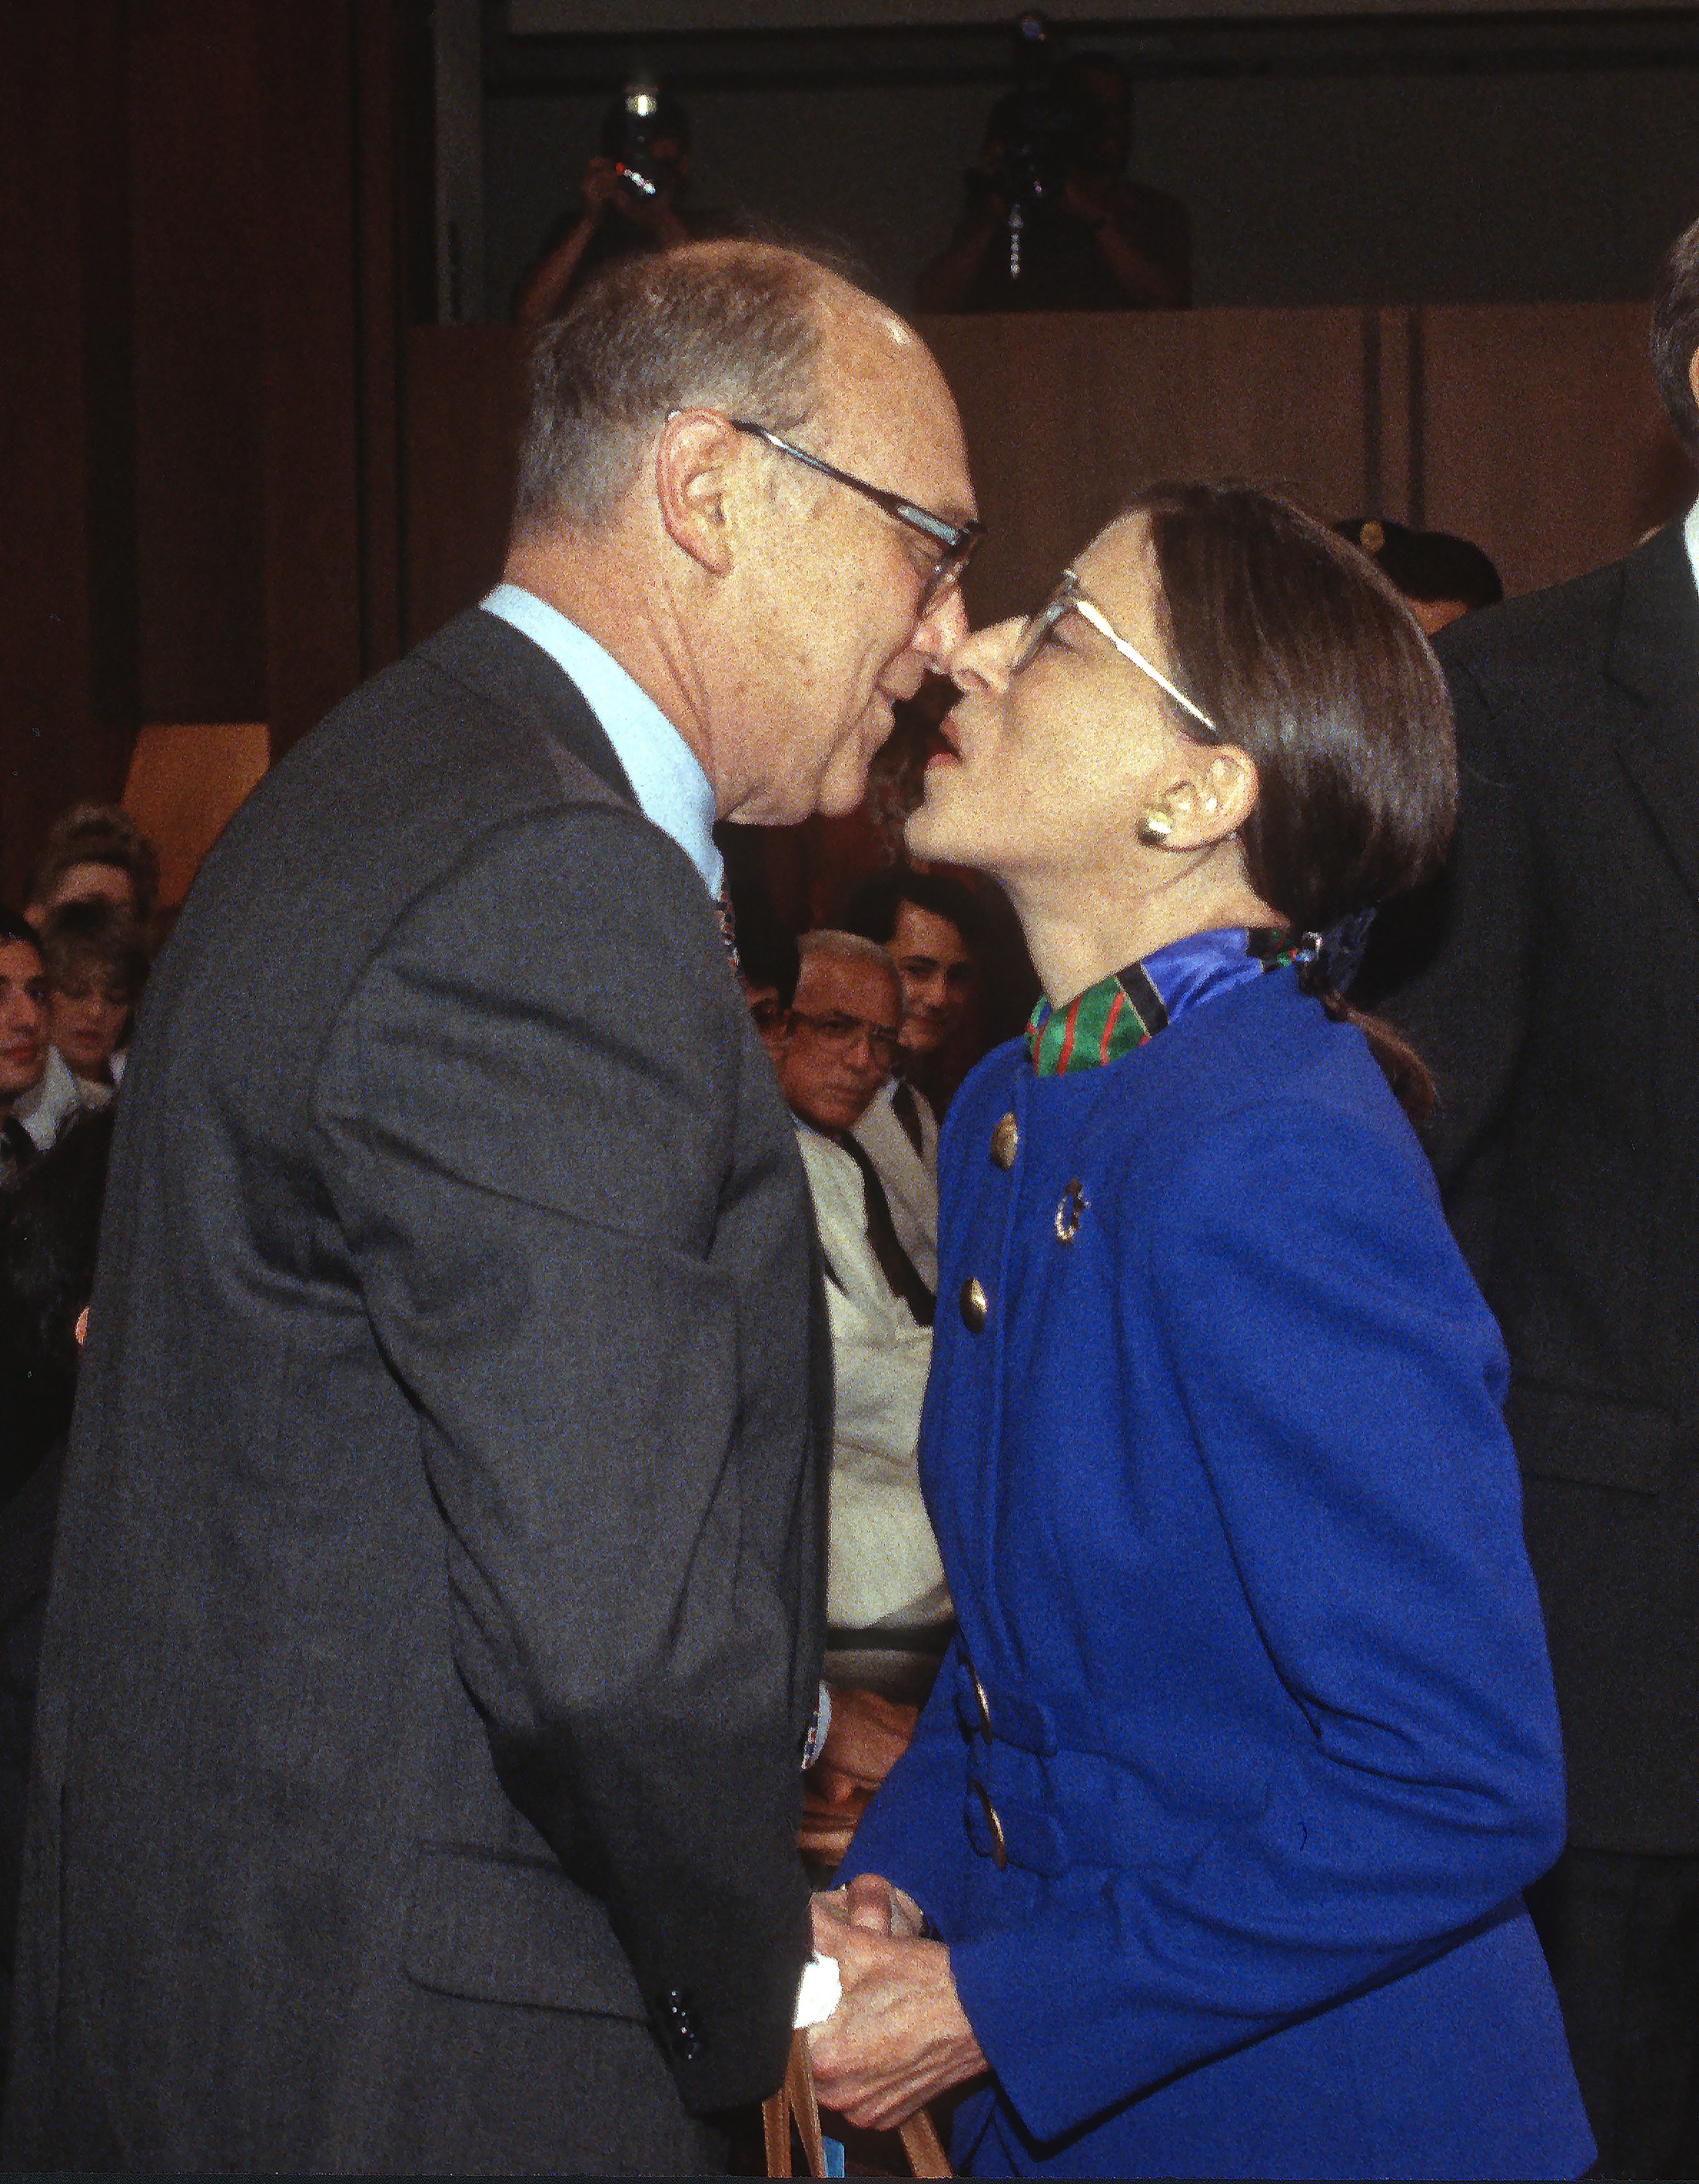 Supreme Court Justice Ruth Bader Ginsburg with her husband Martin Ginsburg on July 20 1993 in Washington D.C. | Source: Getty Images